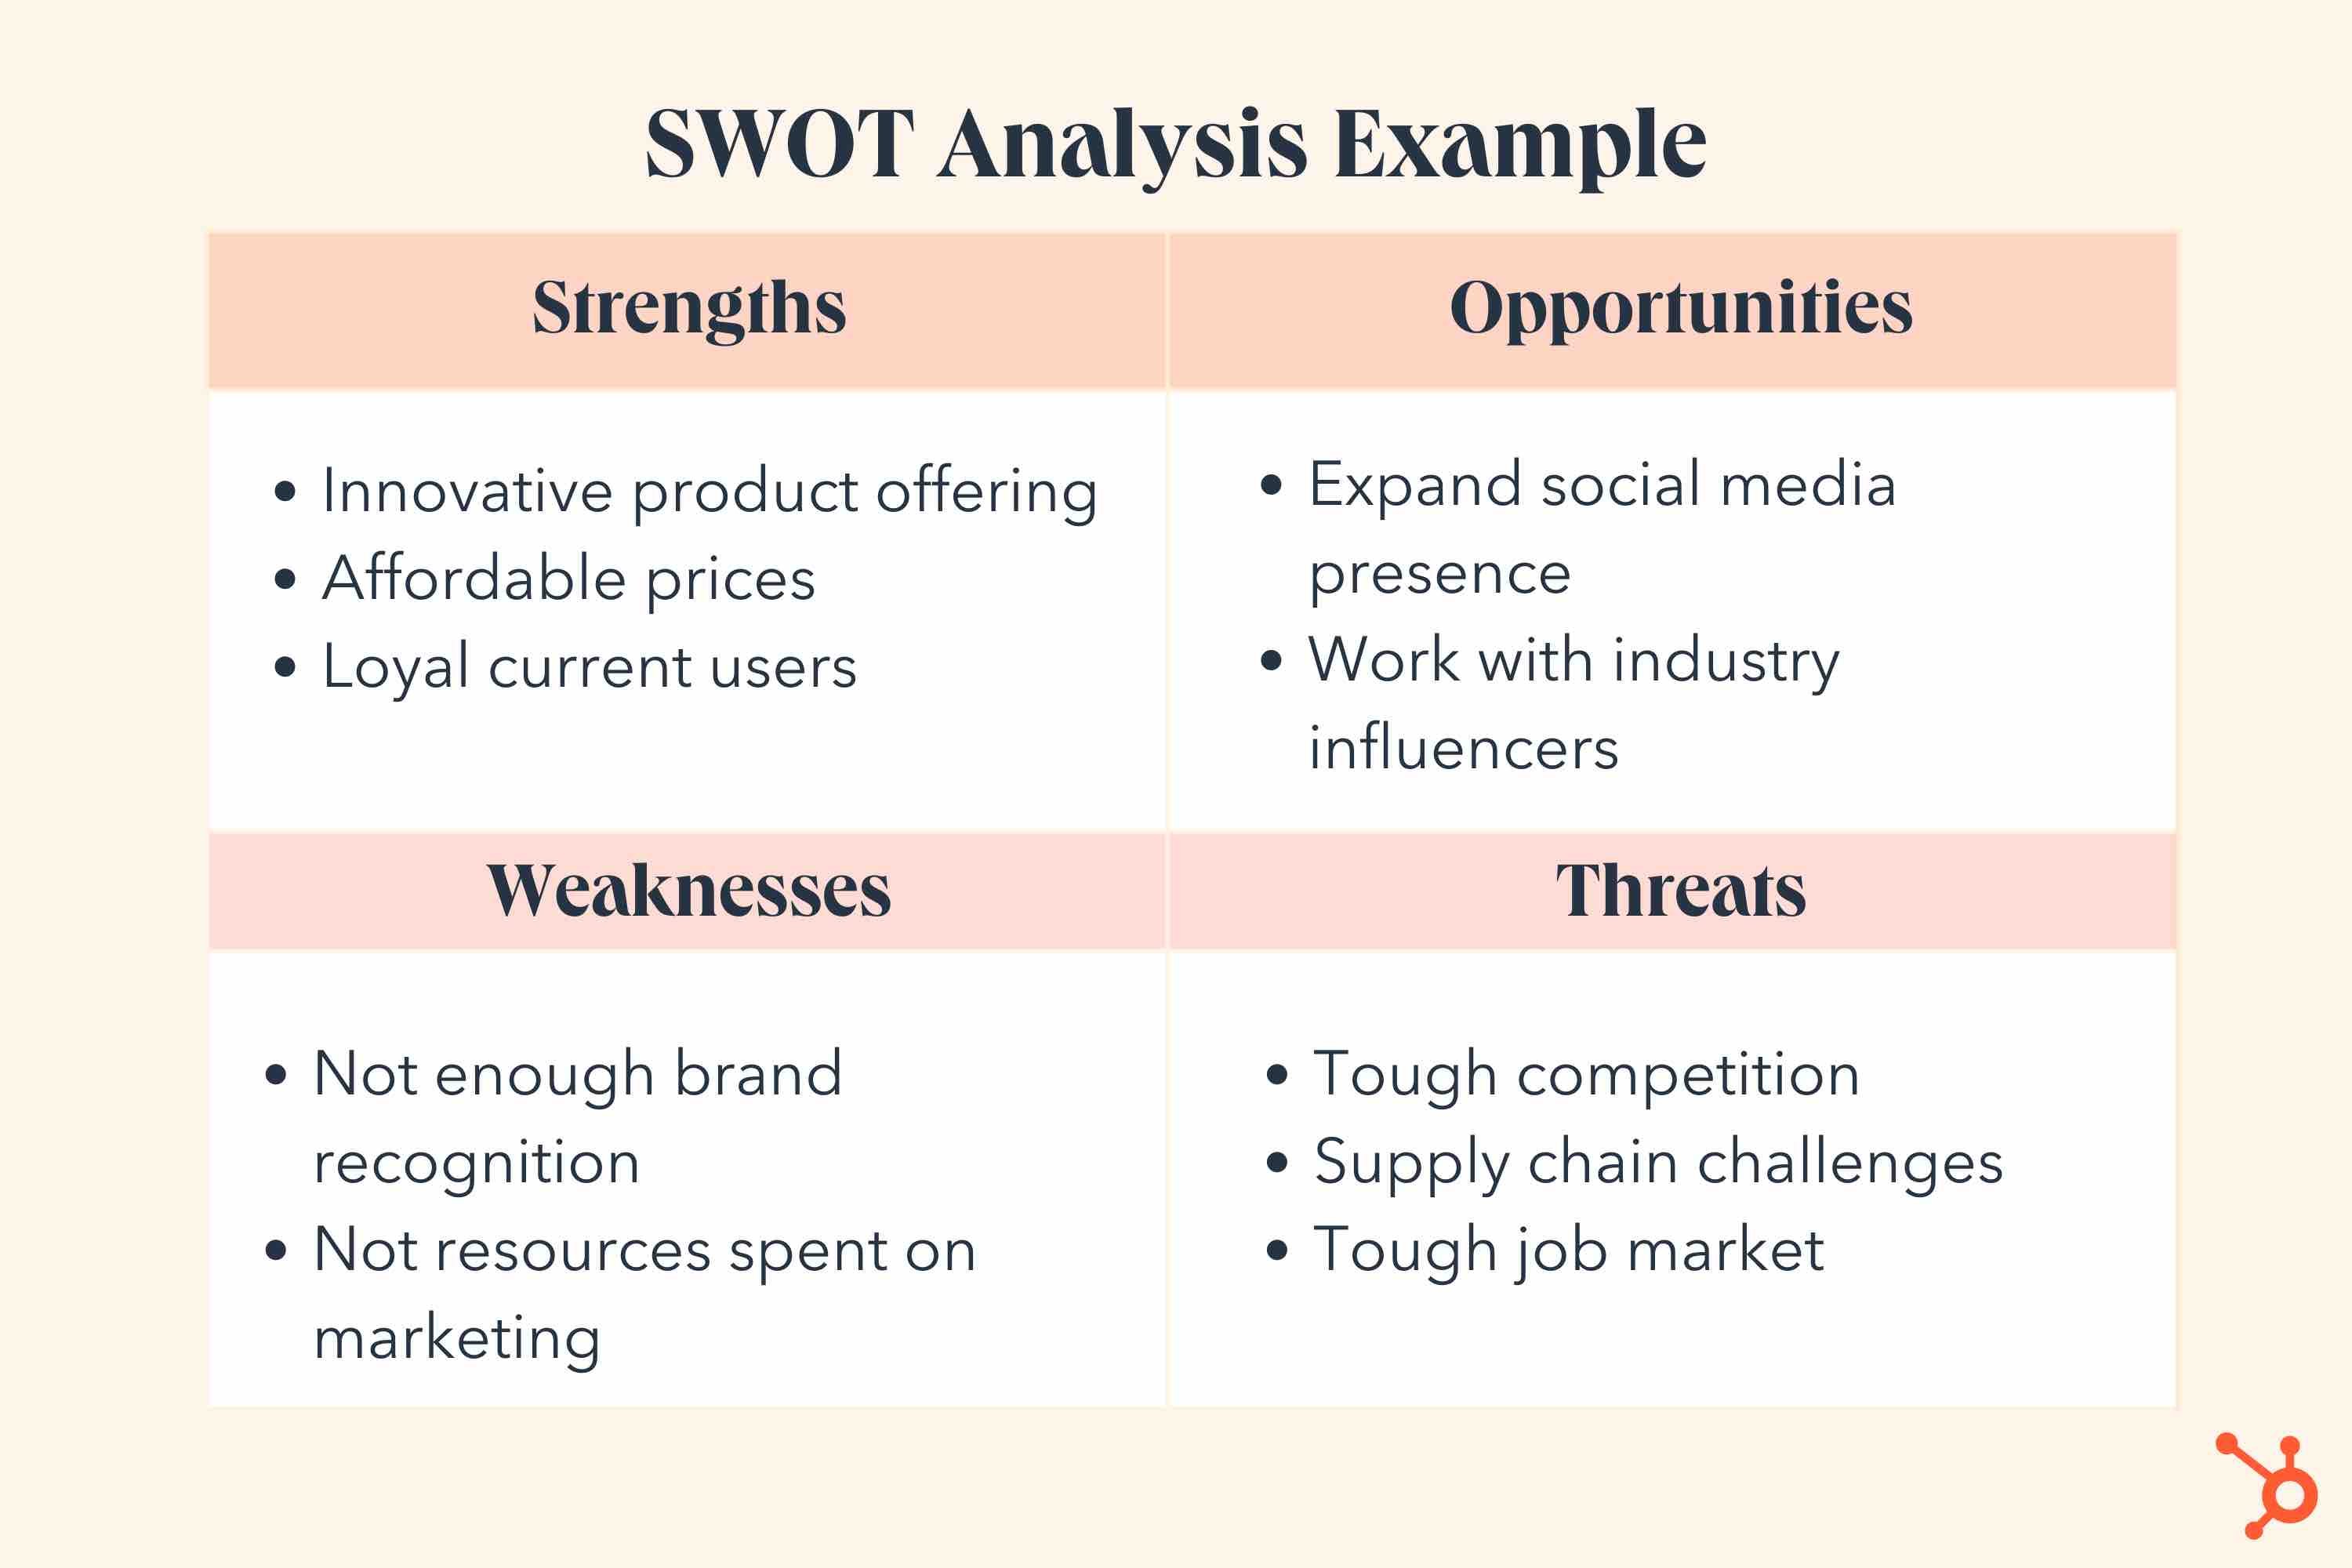 A SWOT analysis example formatted into four quadrants that outlines strengths, opportunities, weaknesses, and threats.